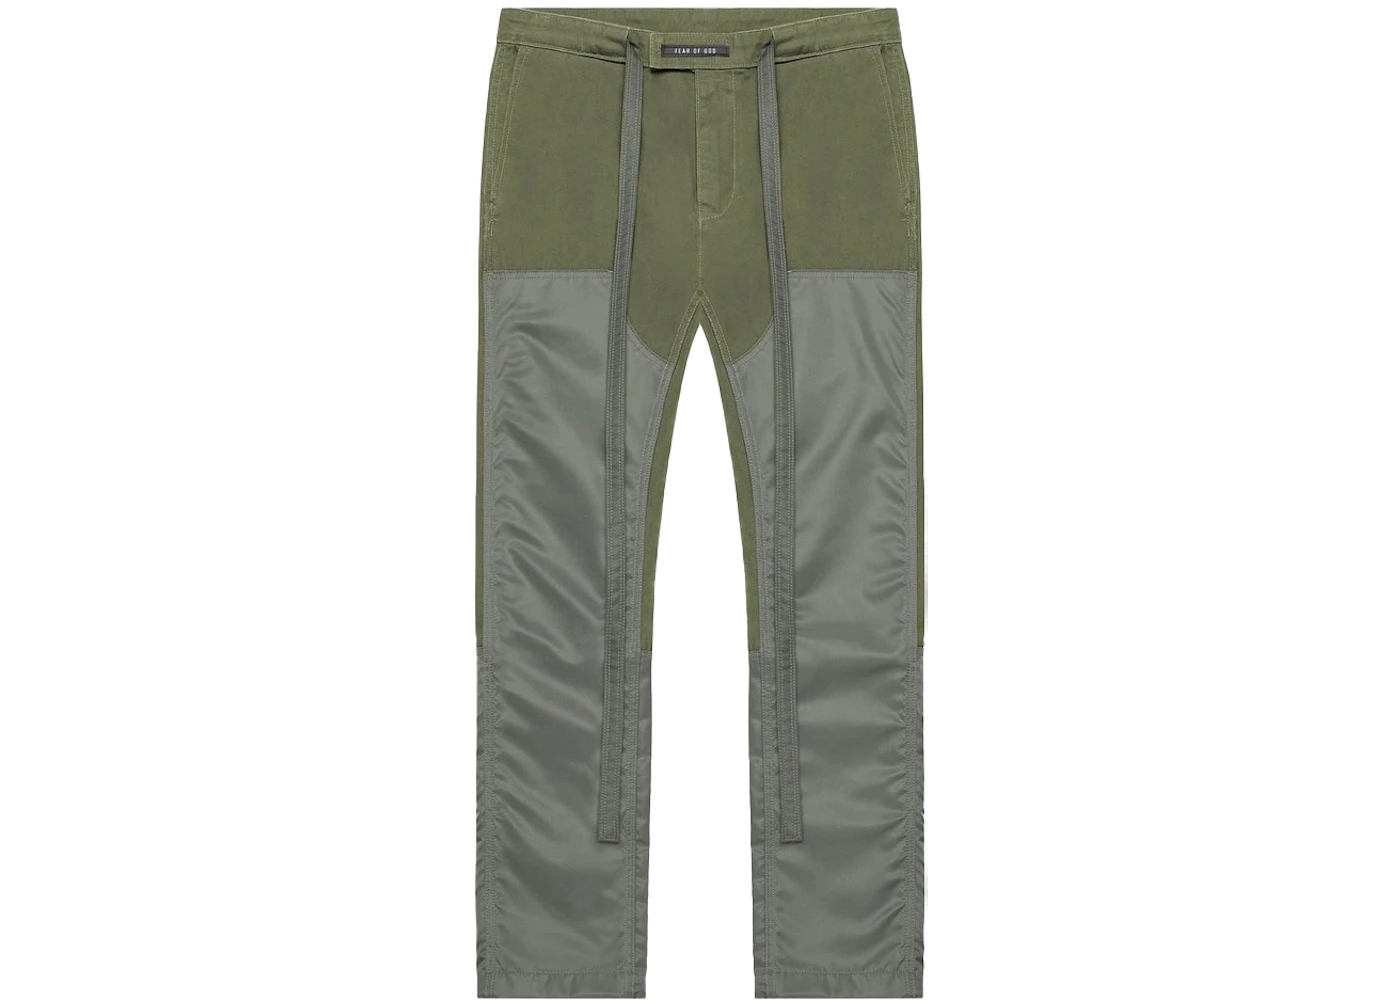 FEAR OF GOD Nylon Canvas Double Front Work Pants Army Green - SIXTH ...